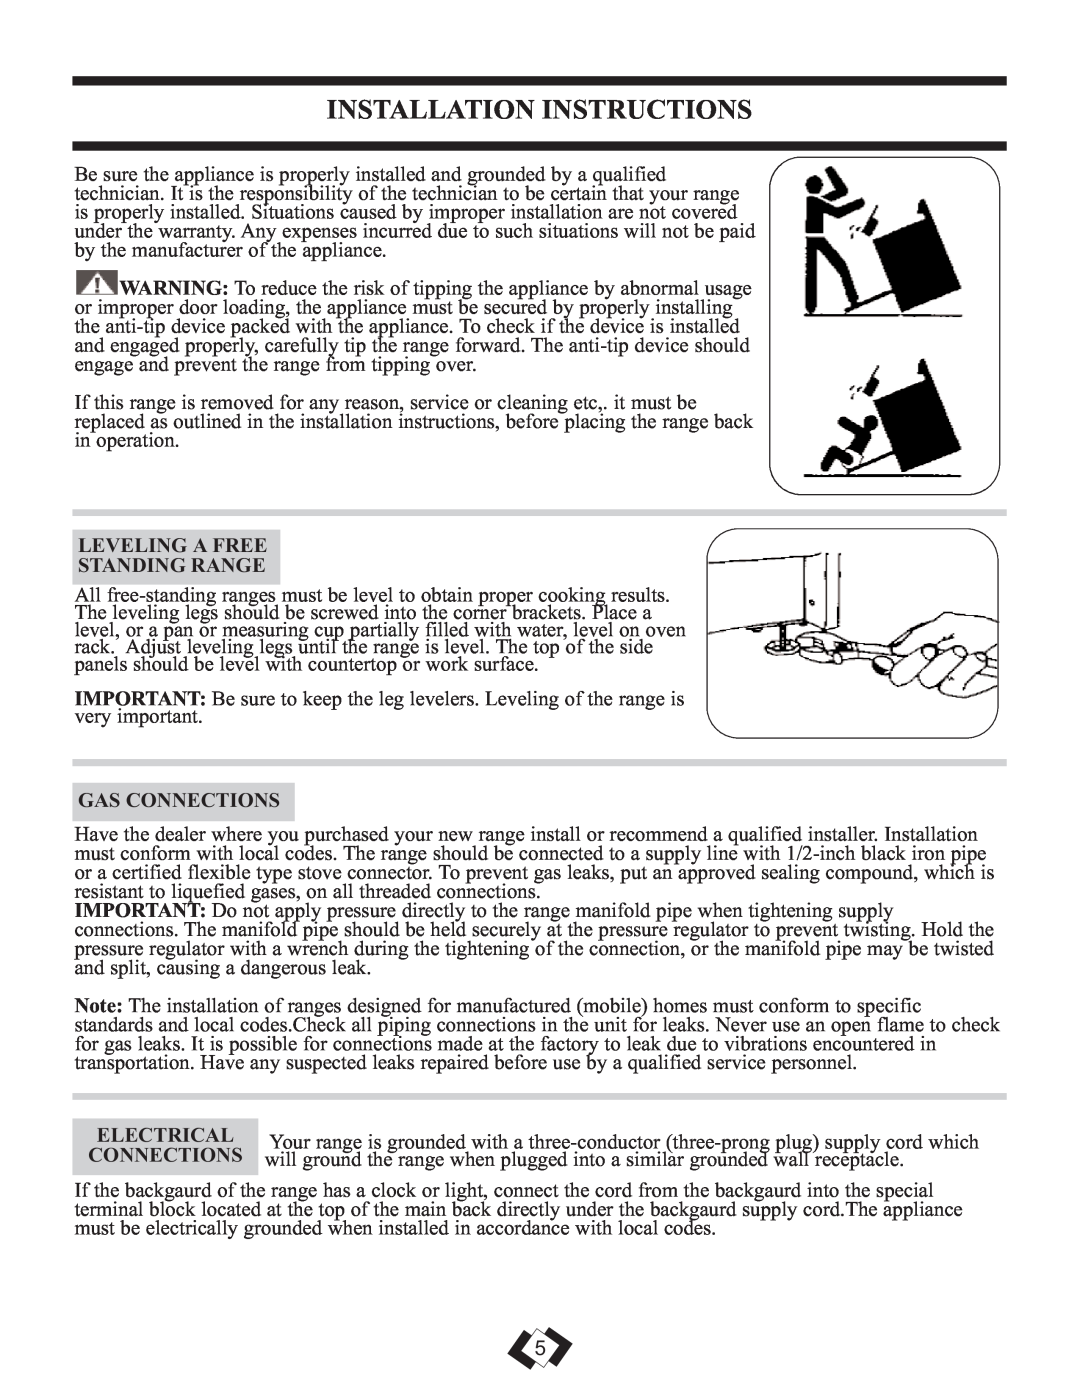 Danby DR299BLSGLP Installation Instructions, Leveling A Free Standing Range, Gas Connections, Electrical 